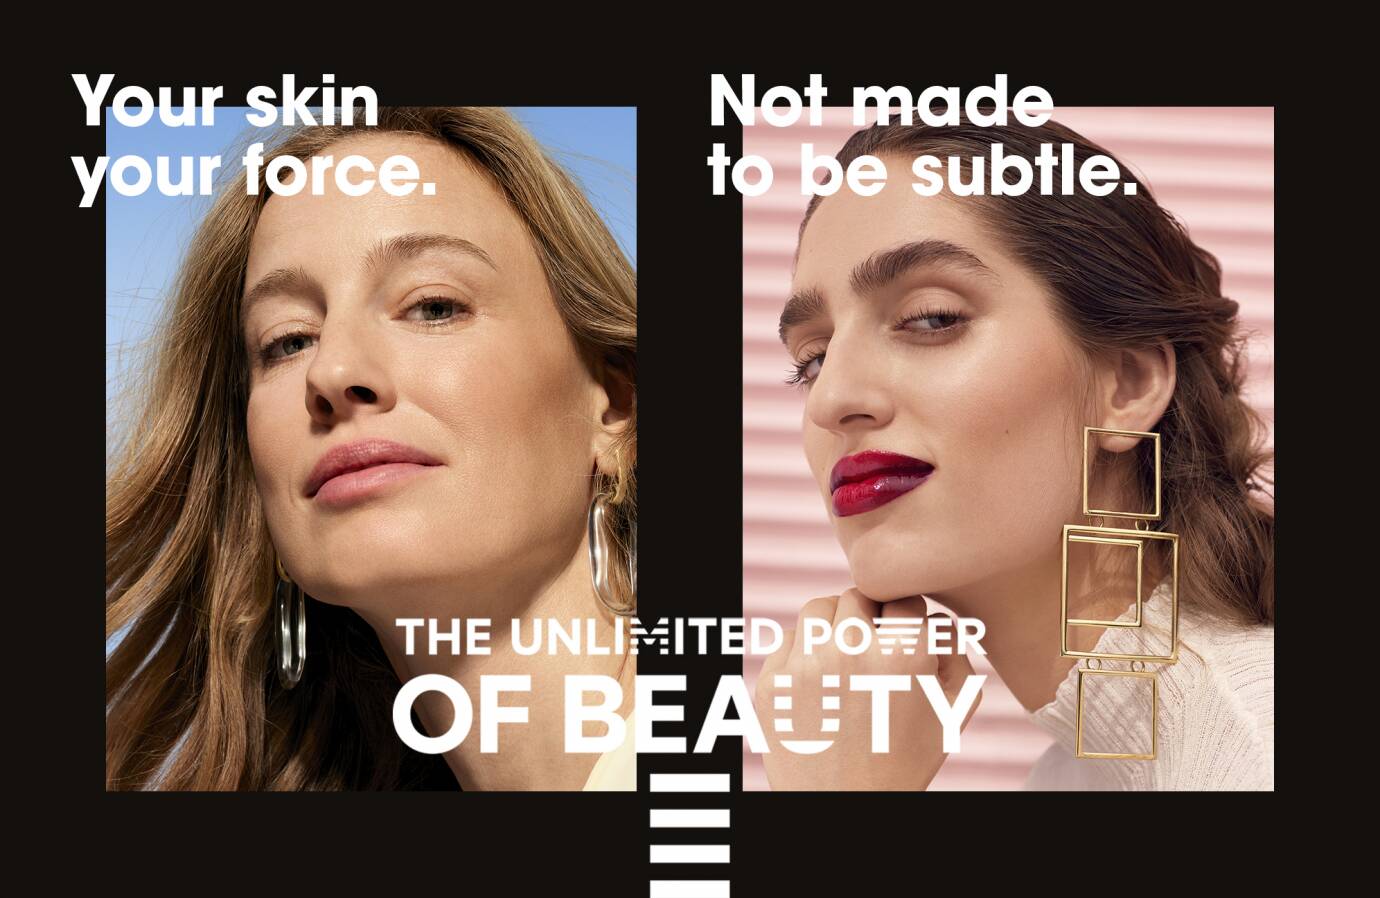 LVMH-owned Sephora sues local firm for trademark infringement, ET